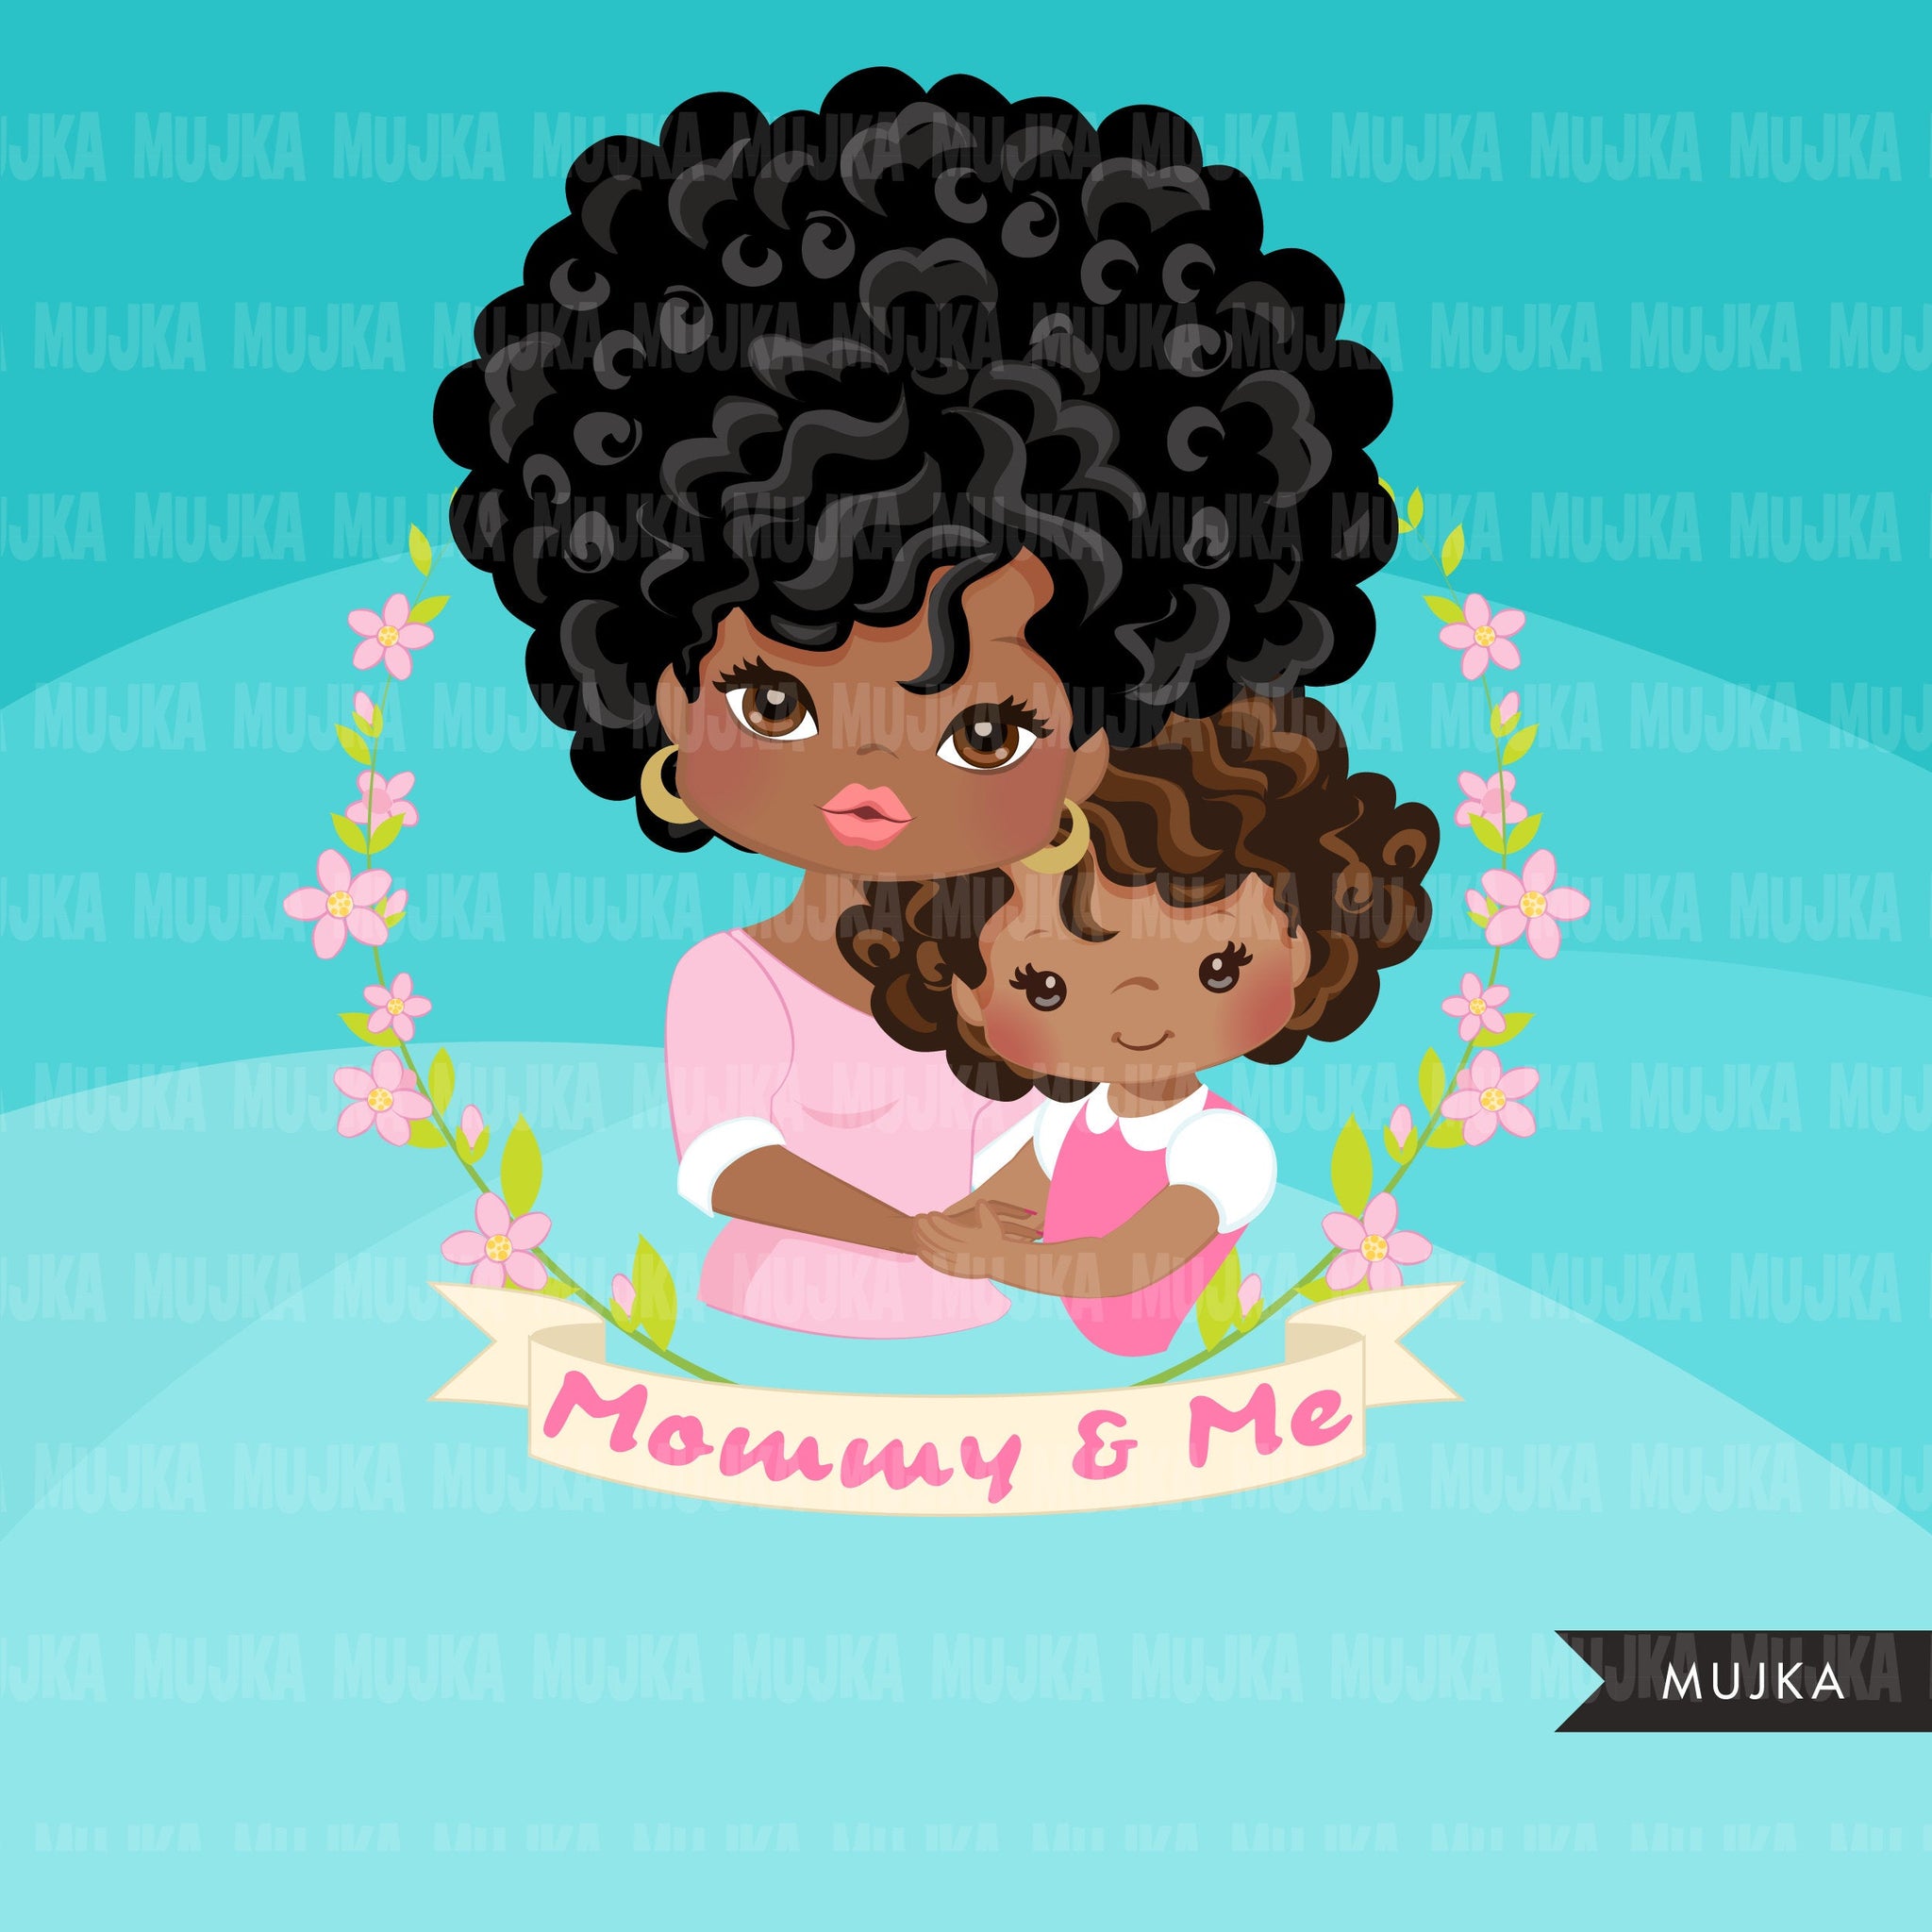 Mothers Day clipart Bundle, mommy and me sublimation designs, digital graphics, mama shirt, mama gift, mother daughter, mother son png